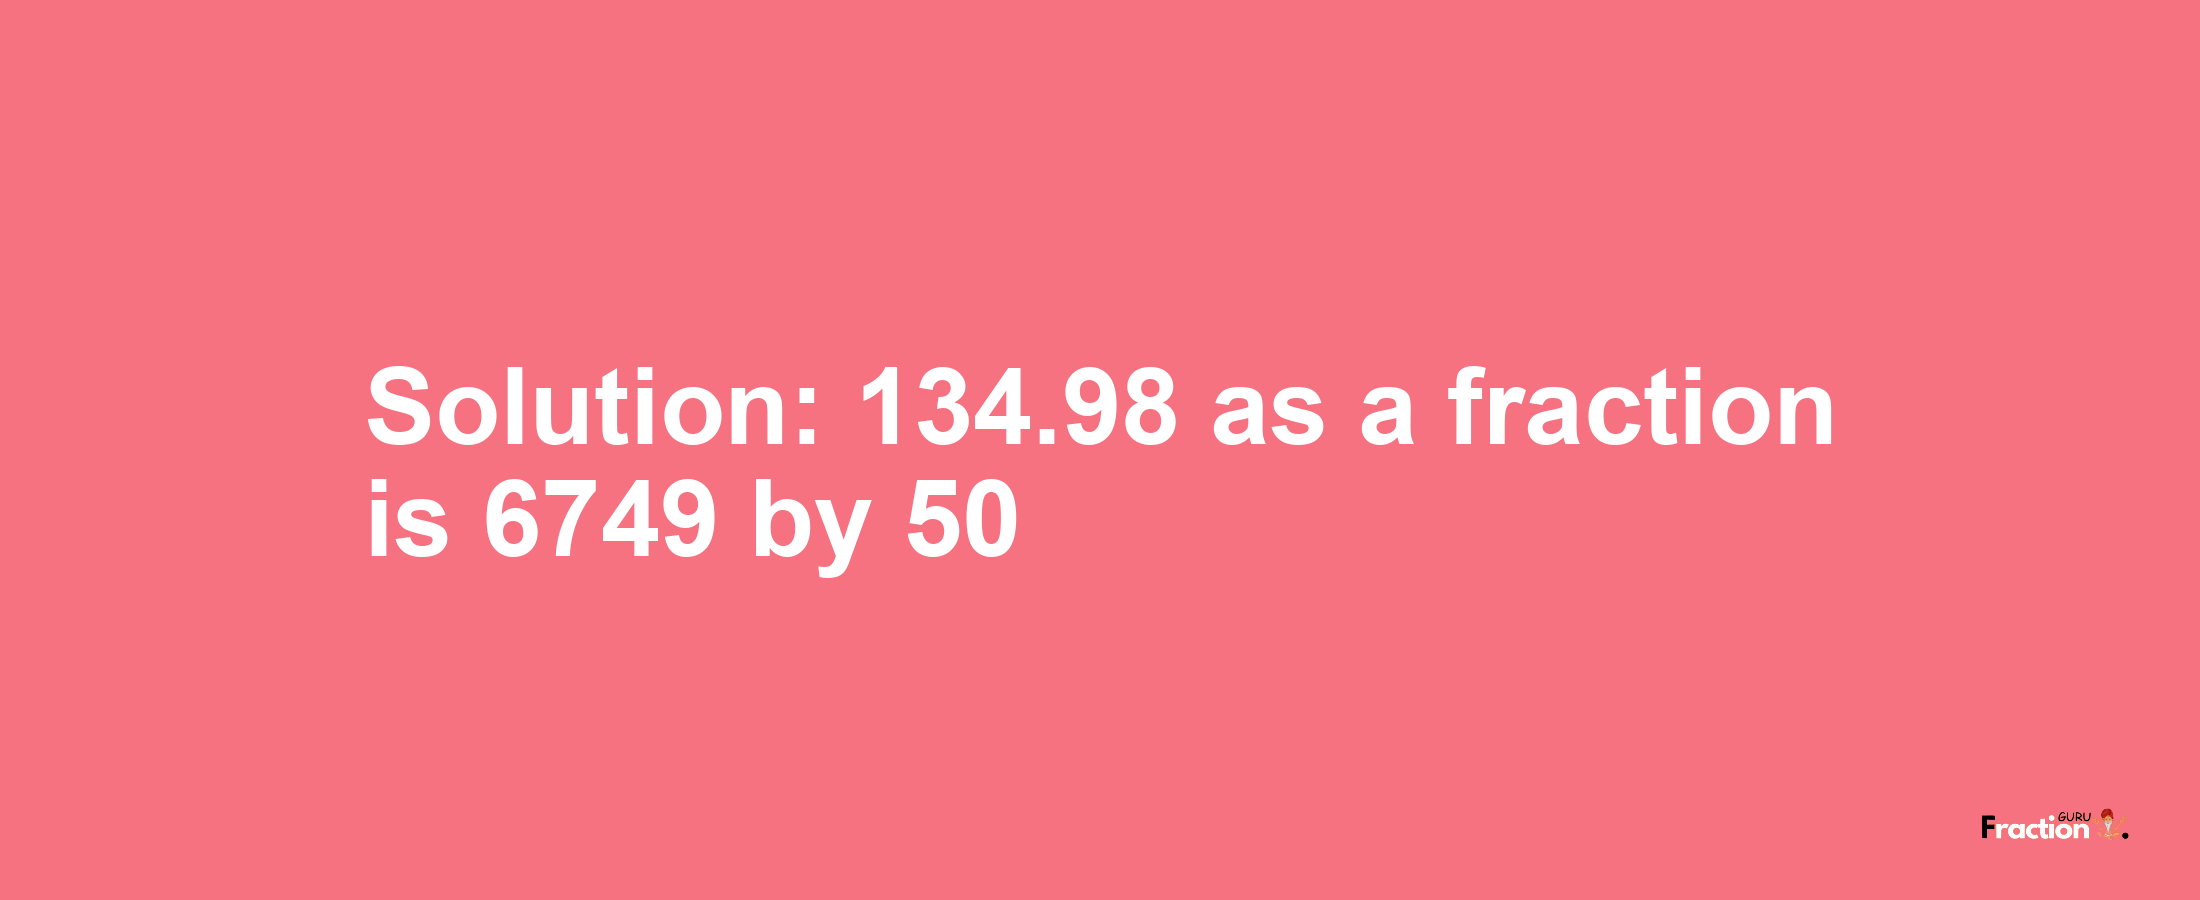 Solution:134.98 as a fraction is 6749/50